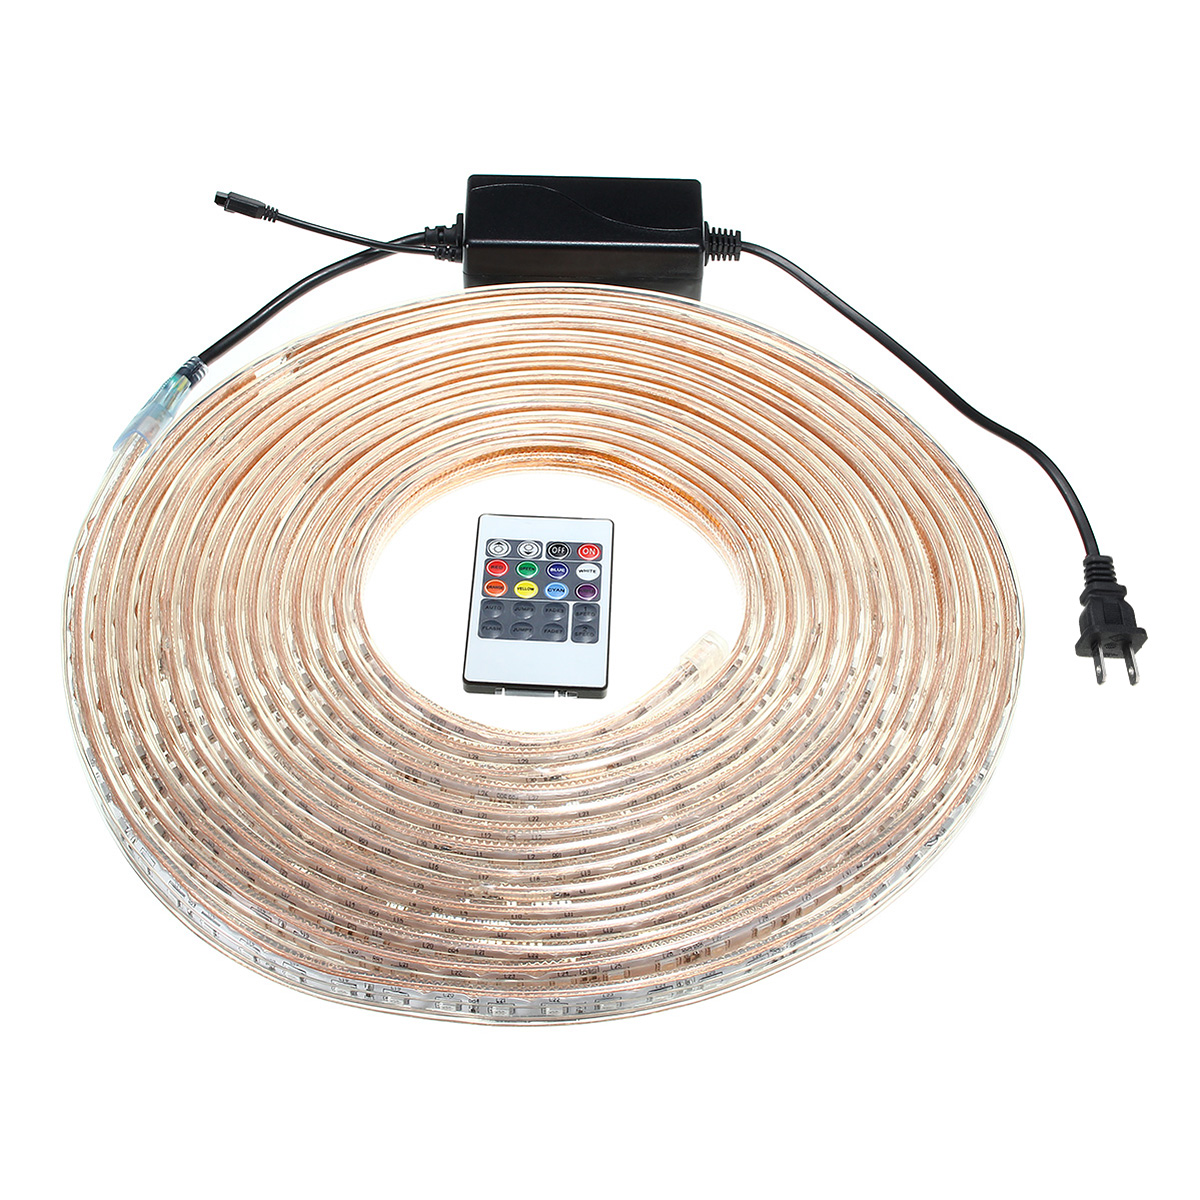 Find 10/15M SMD5050 LED RGB Flexible Rope Outdoor Waterproof Strip Light Plug Remote Control AC110V for Sale on Gipsybee.com with cryptocurrencies